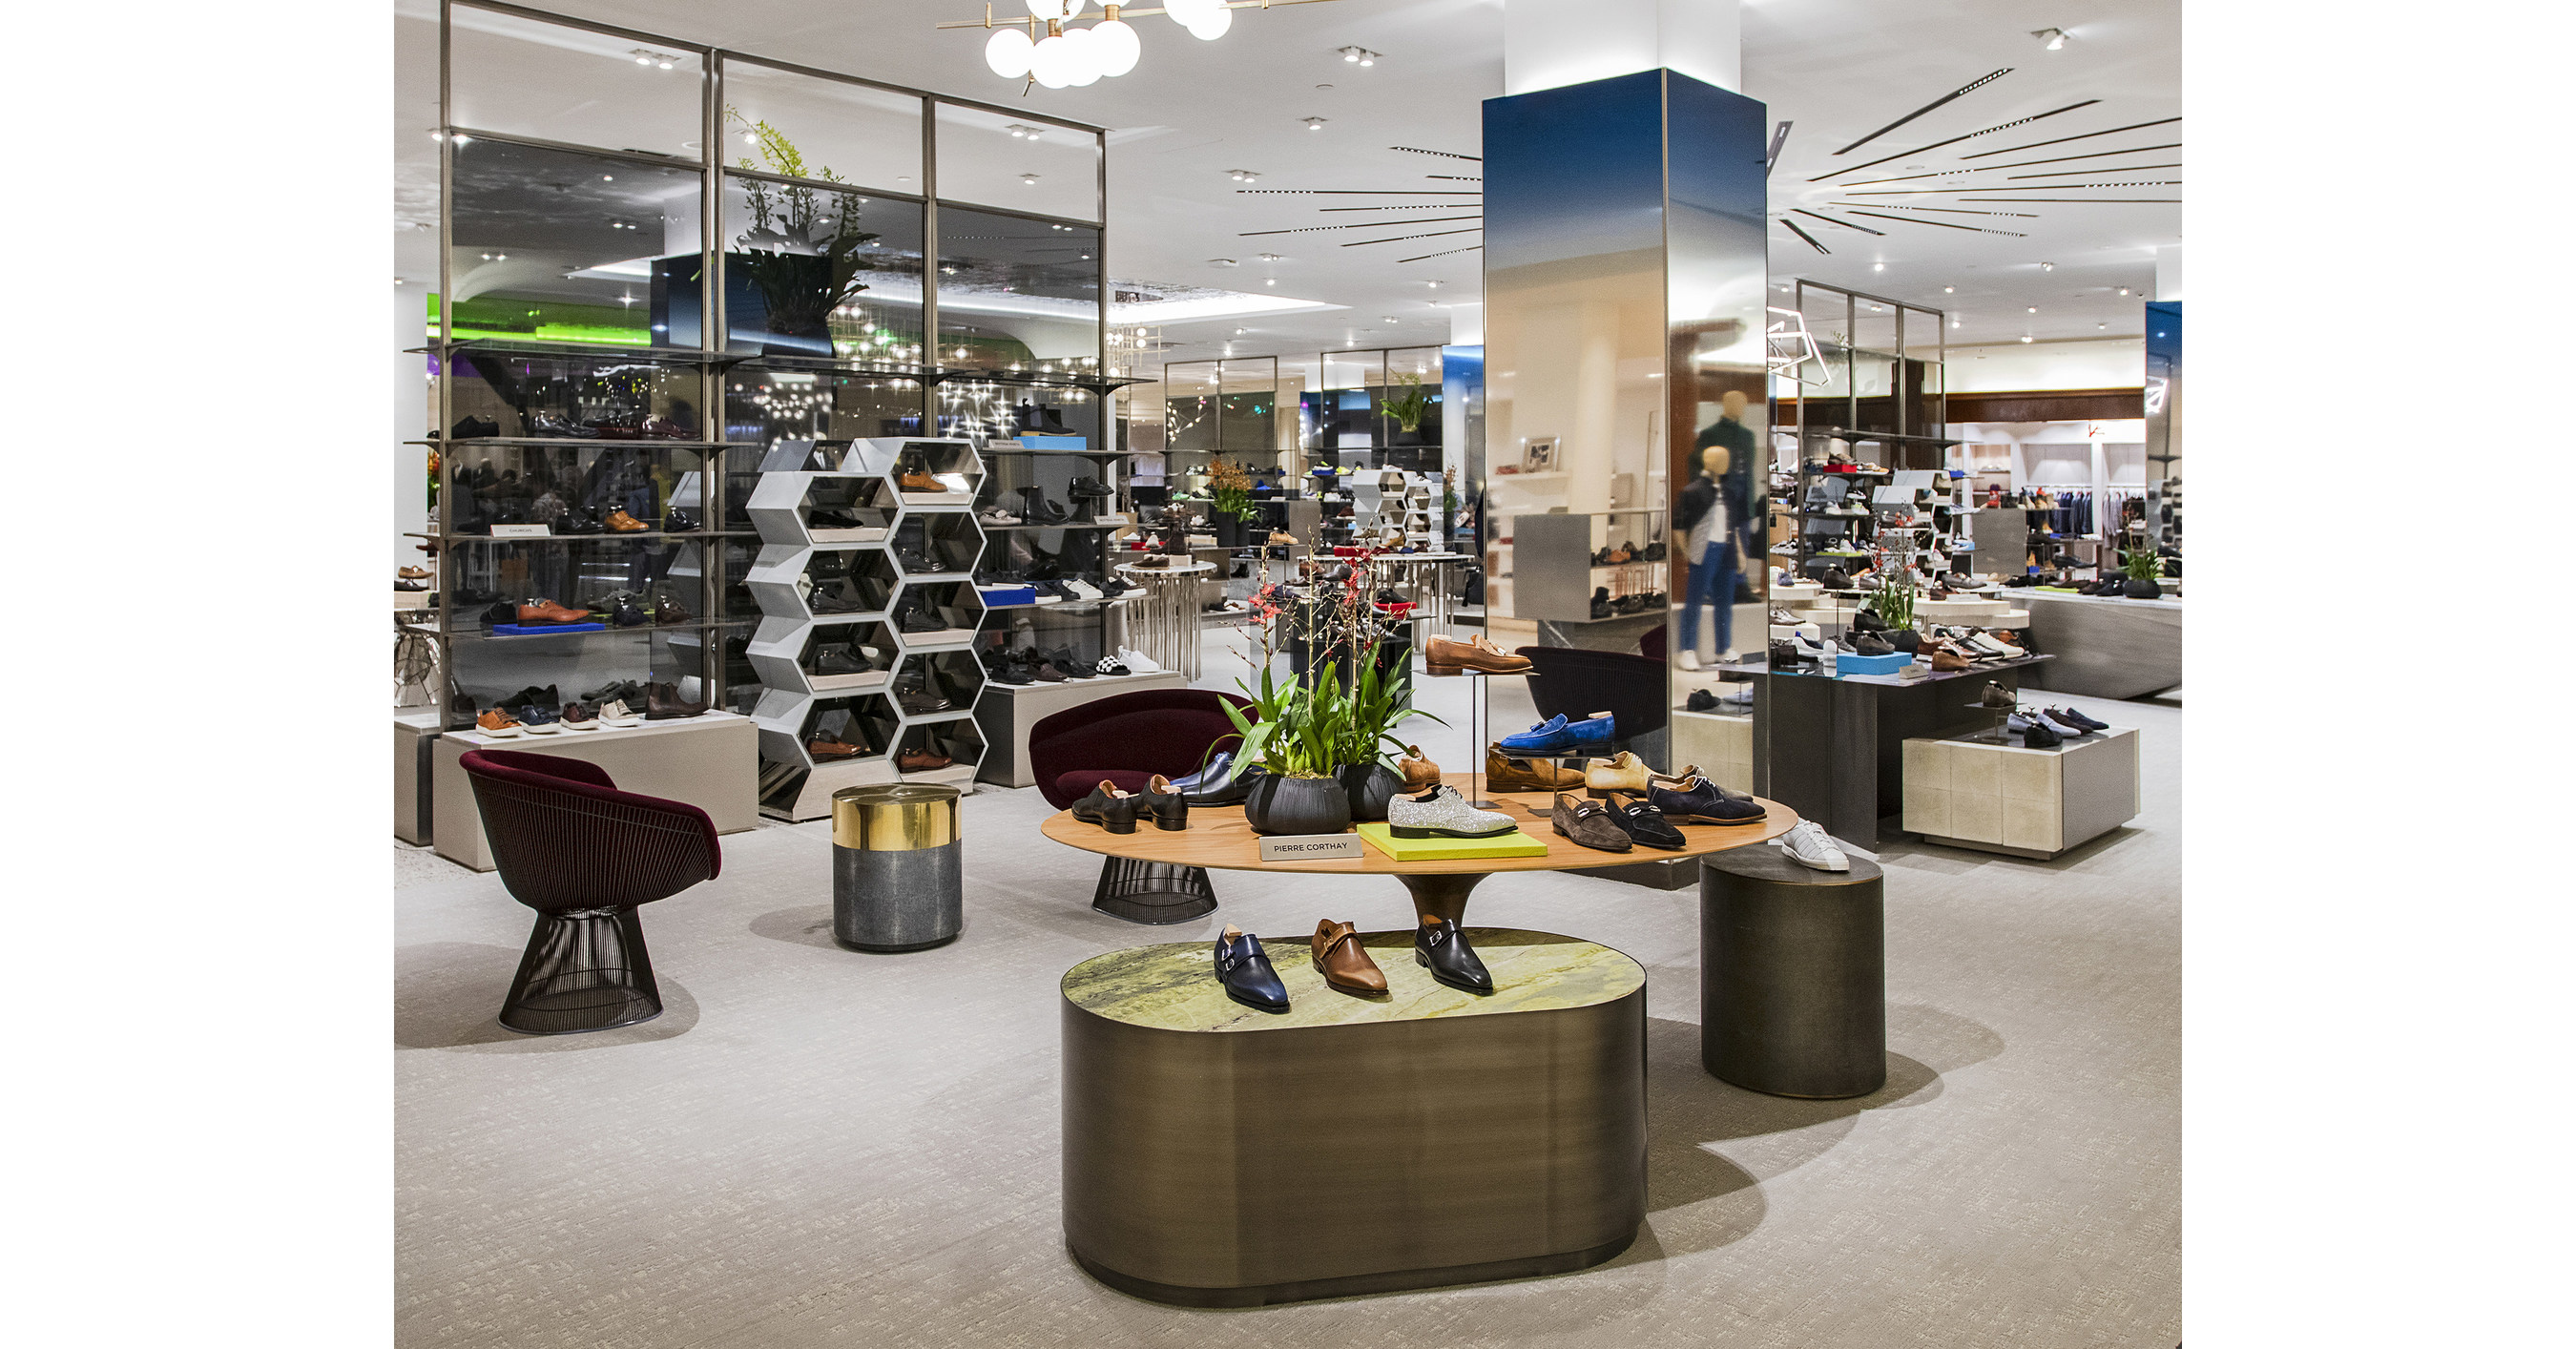 Saks' flagship store - Review of Saks Fifth Avenue, New York City